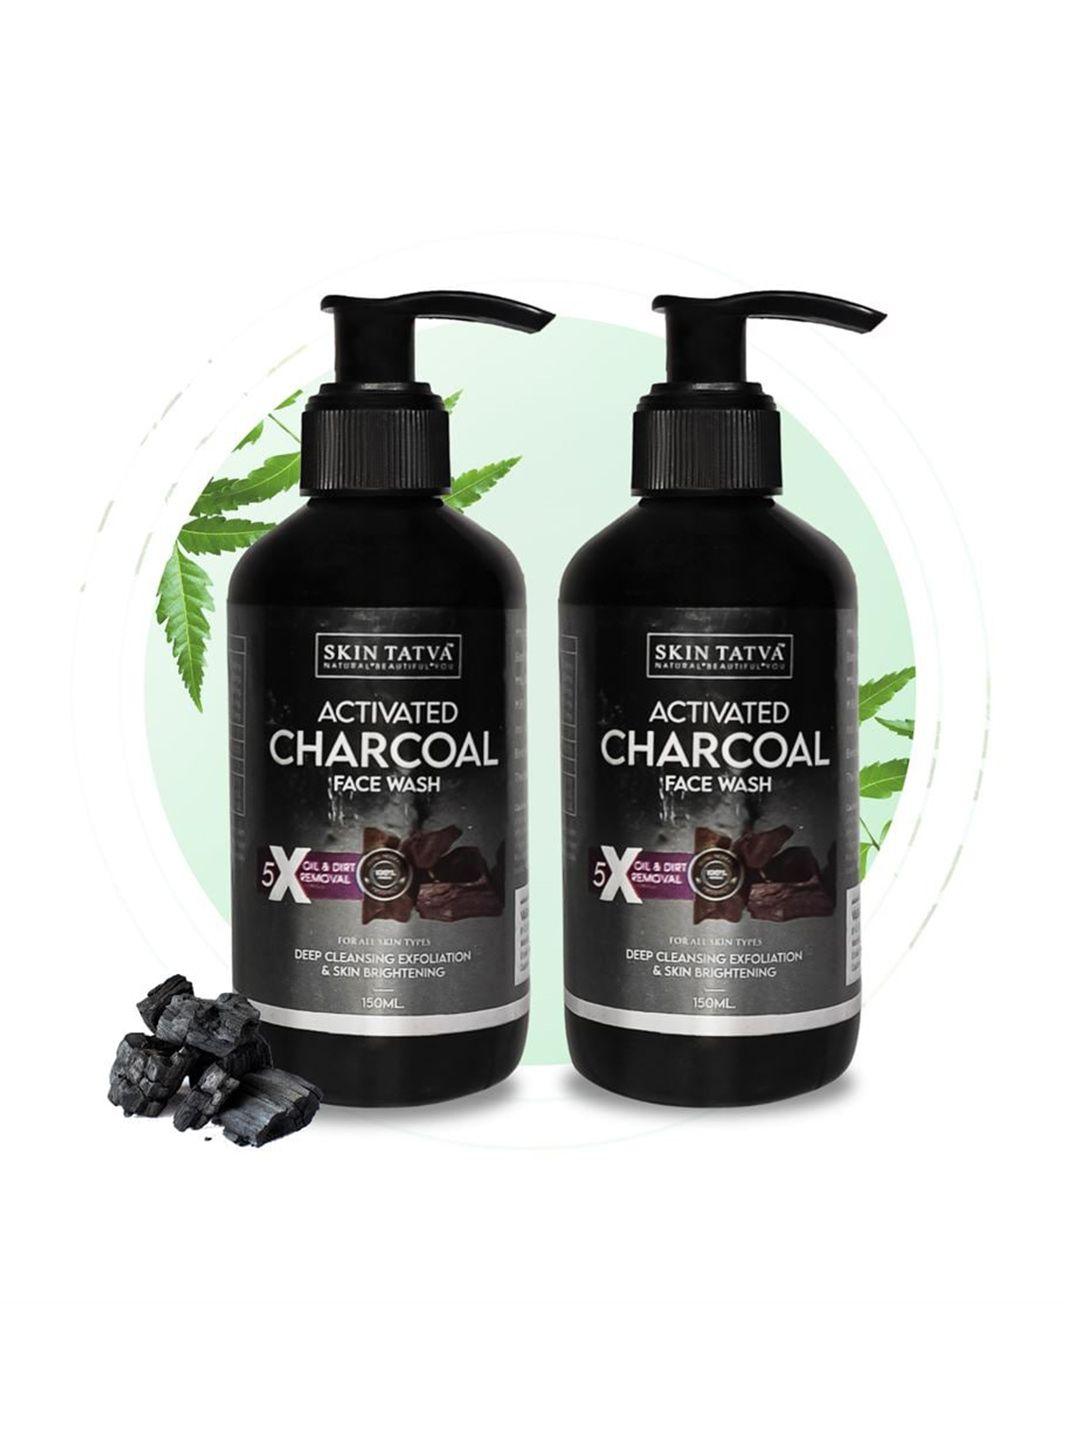 skin tatva set of 2 activated charcoal face wash - 150 ml each